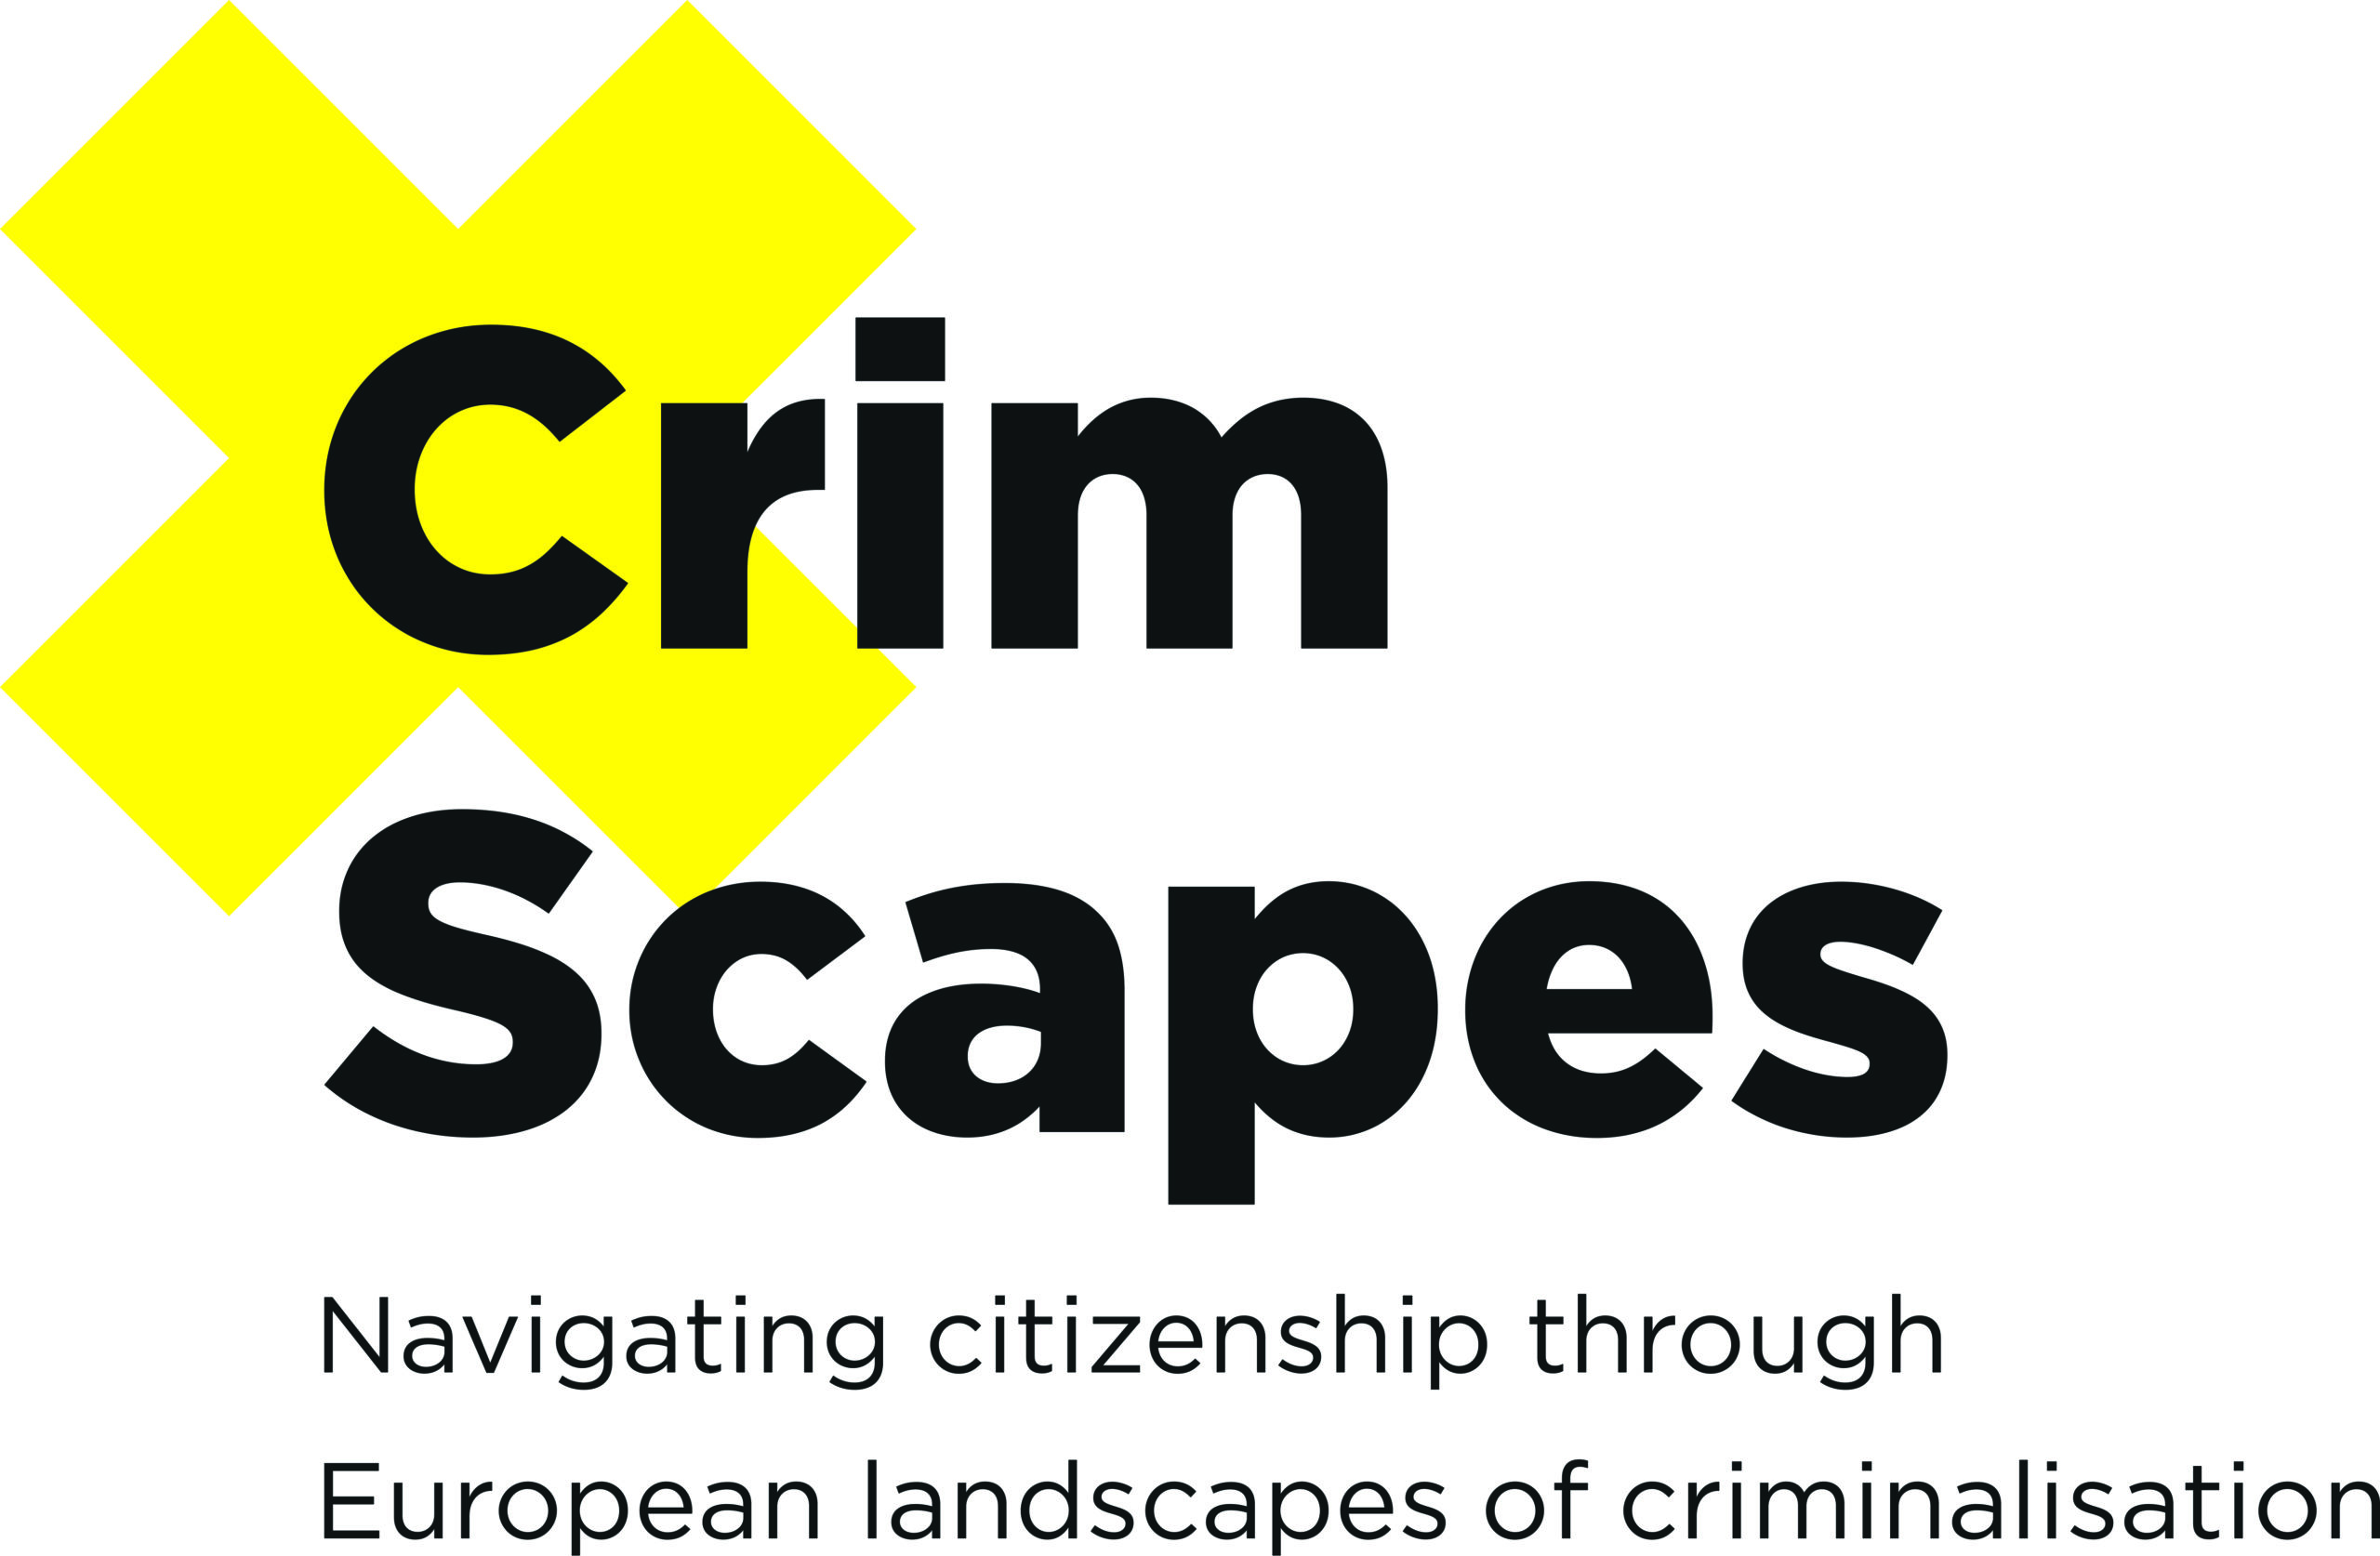 CrimScapes Logo which is a yellow cross and CrimScapes title